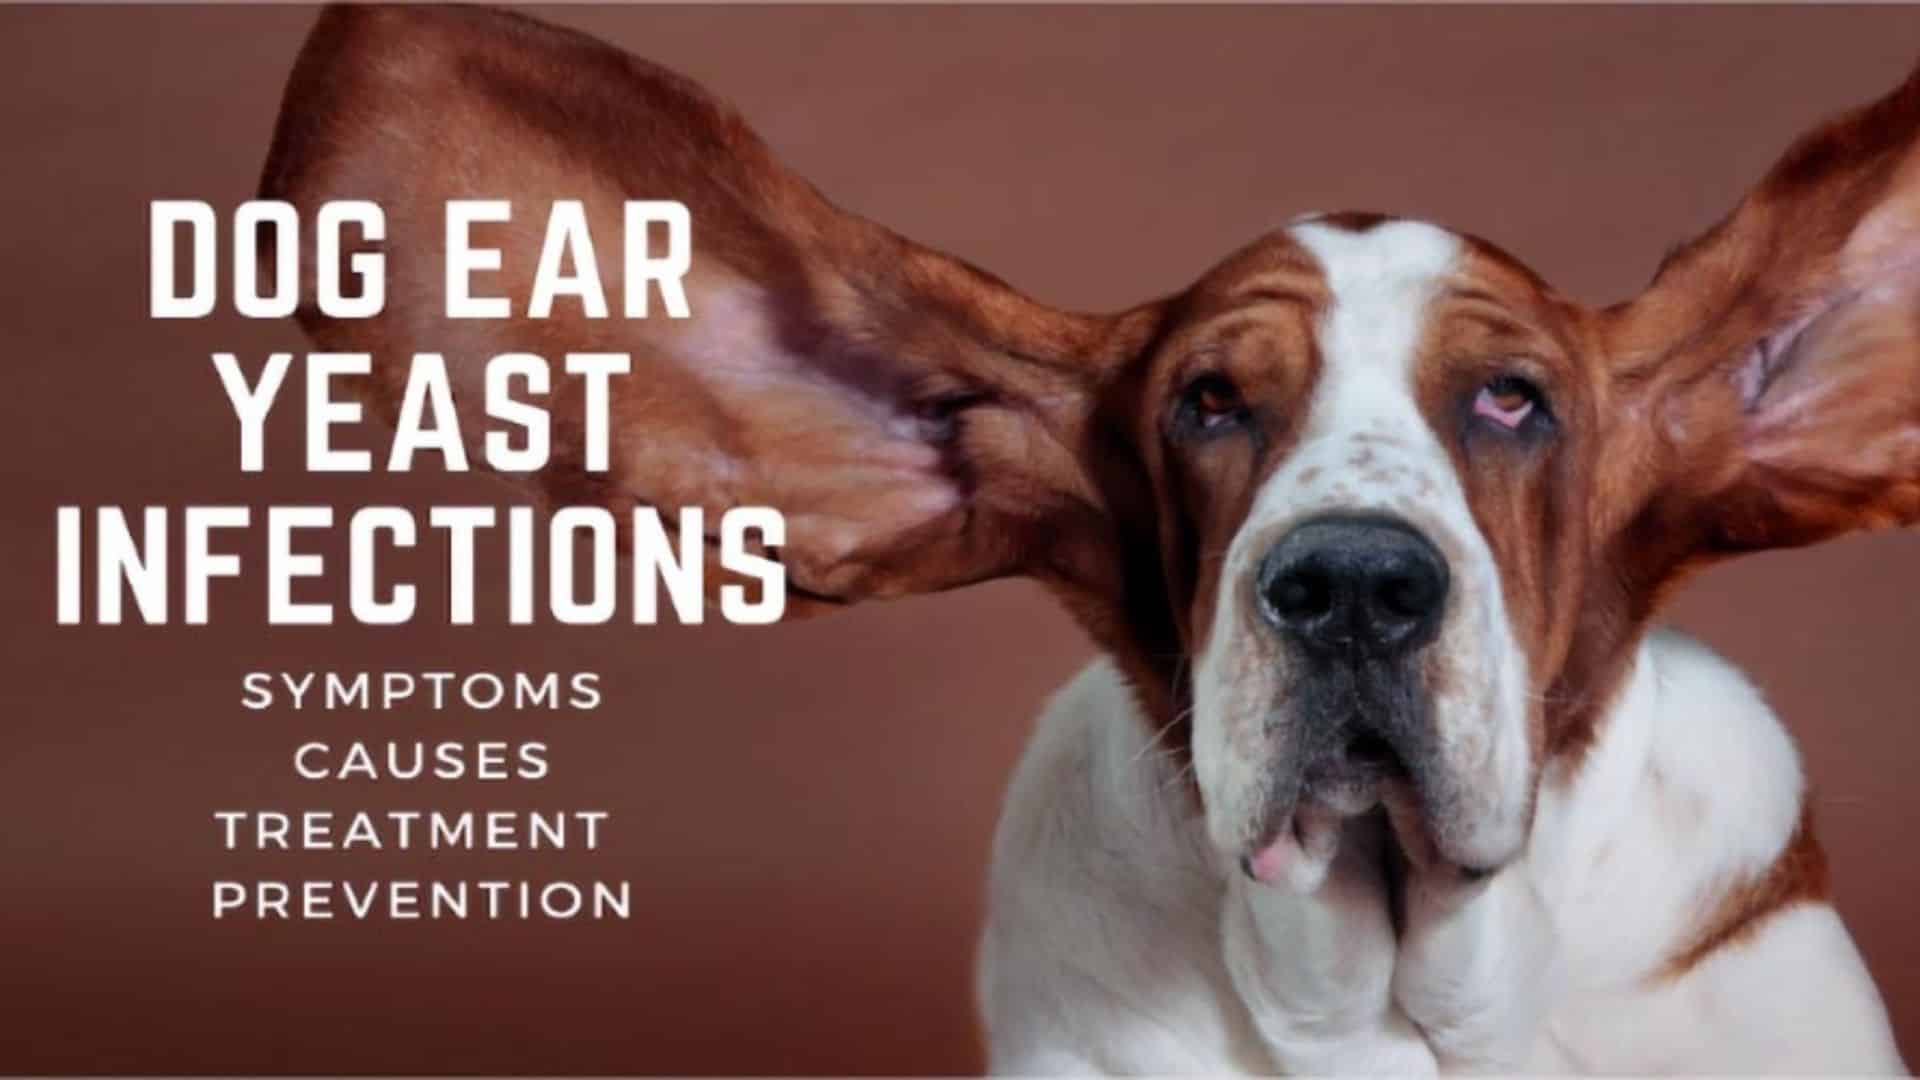 Dog Ear Yeast Infections Symptoms Causes Treatment And Prevention